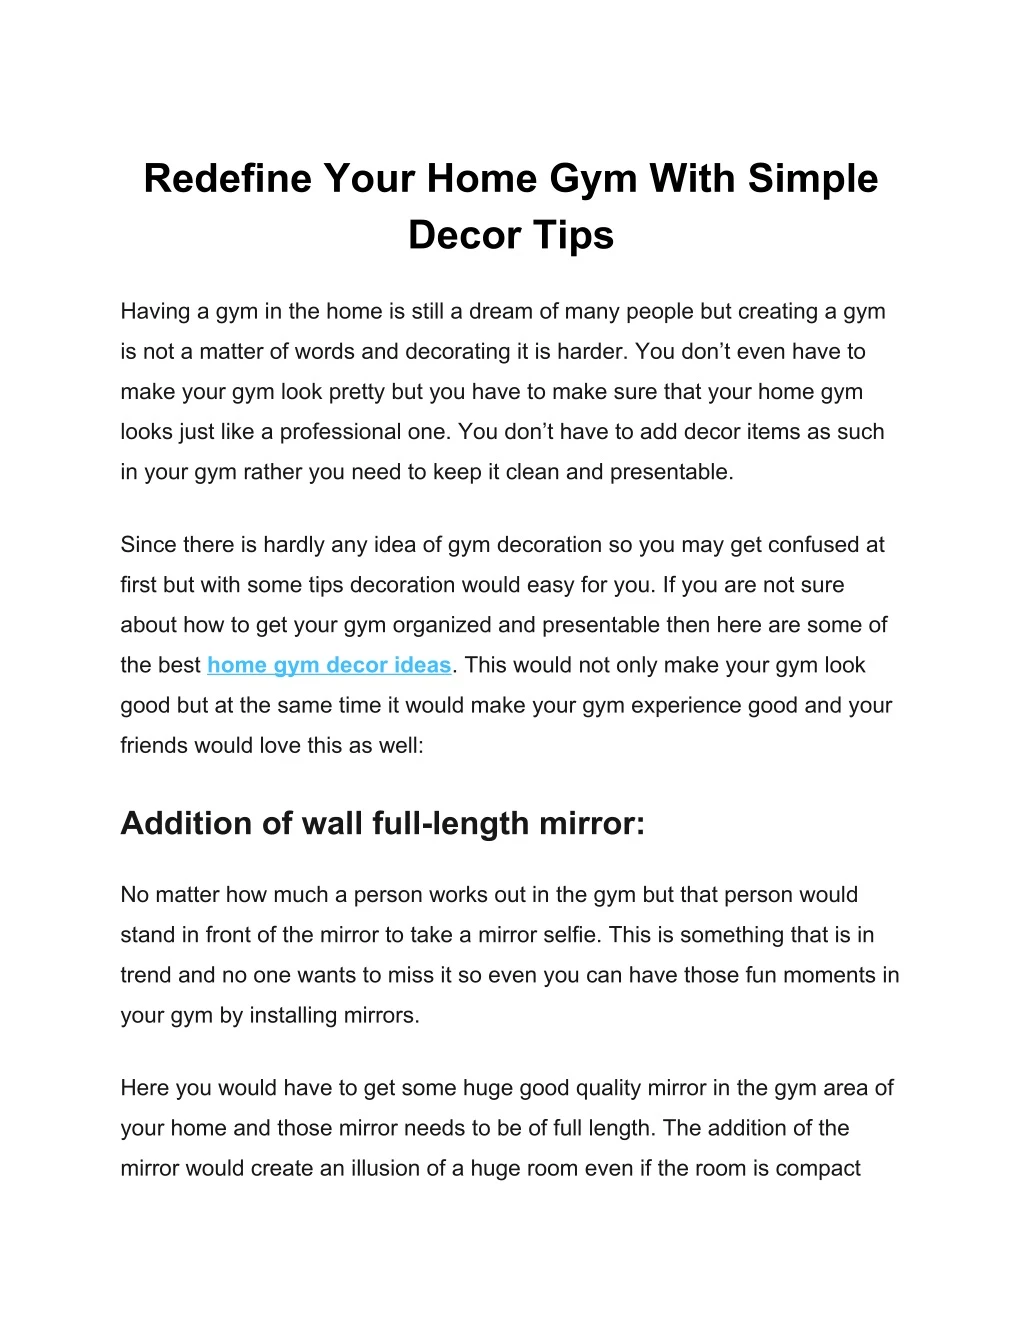 redefine your home gym with simple decor tips